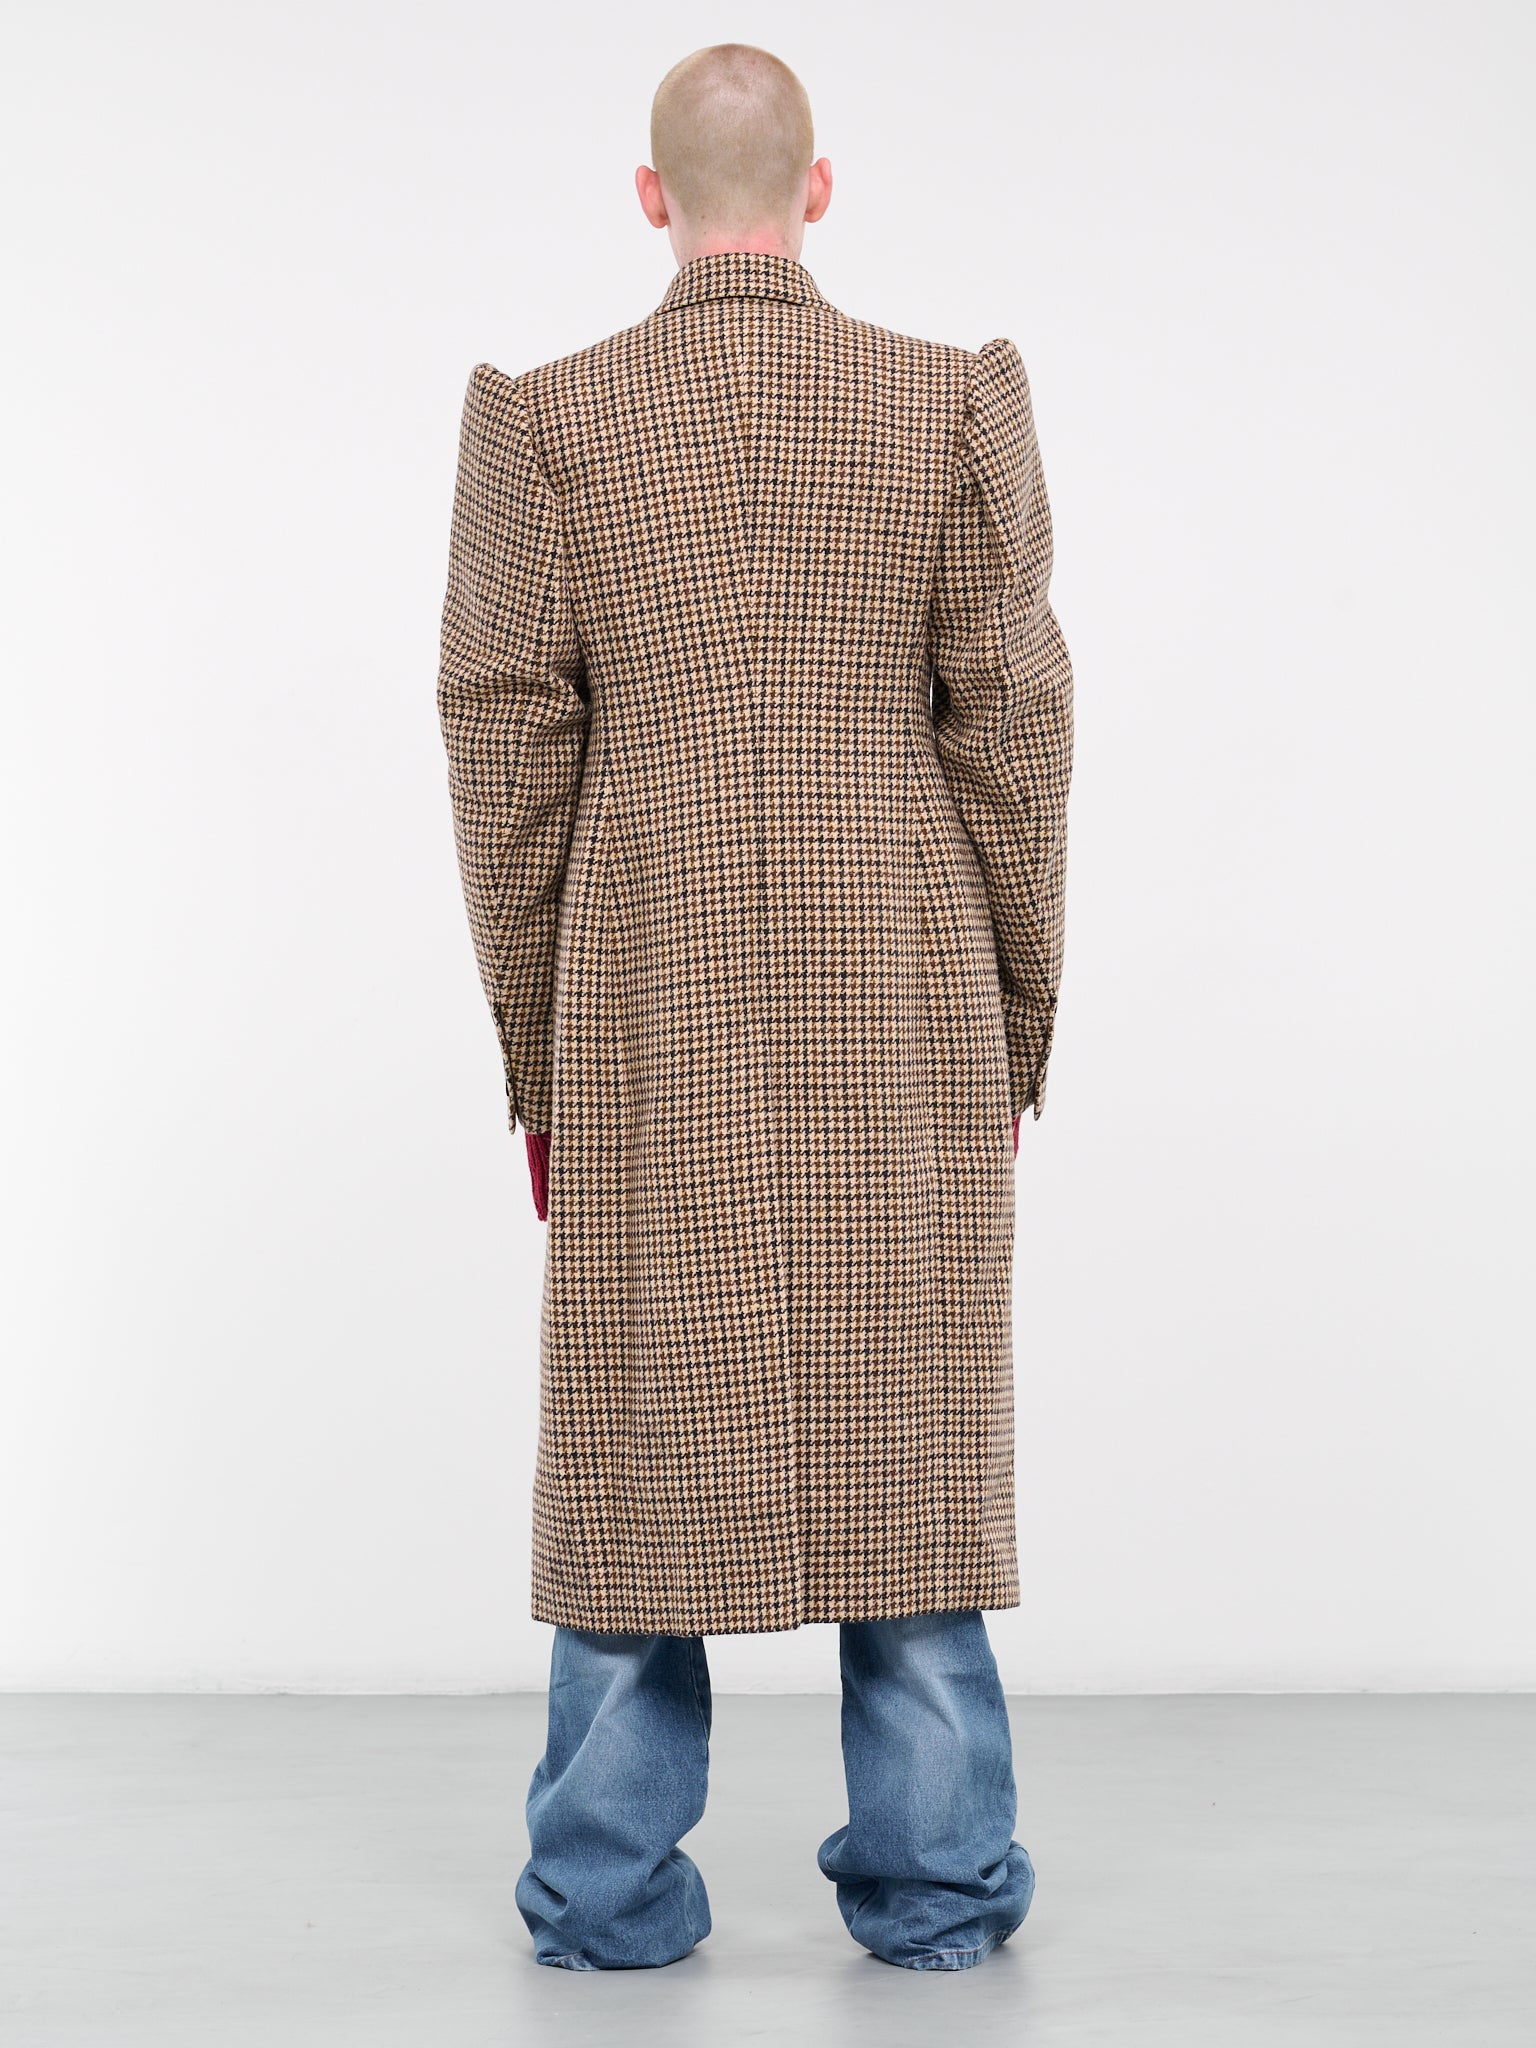 Houndstooth Coat (CO-001-B-HOUNDSTOOTH)